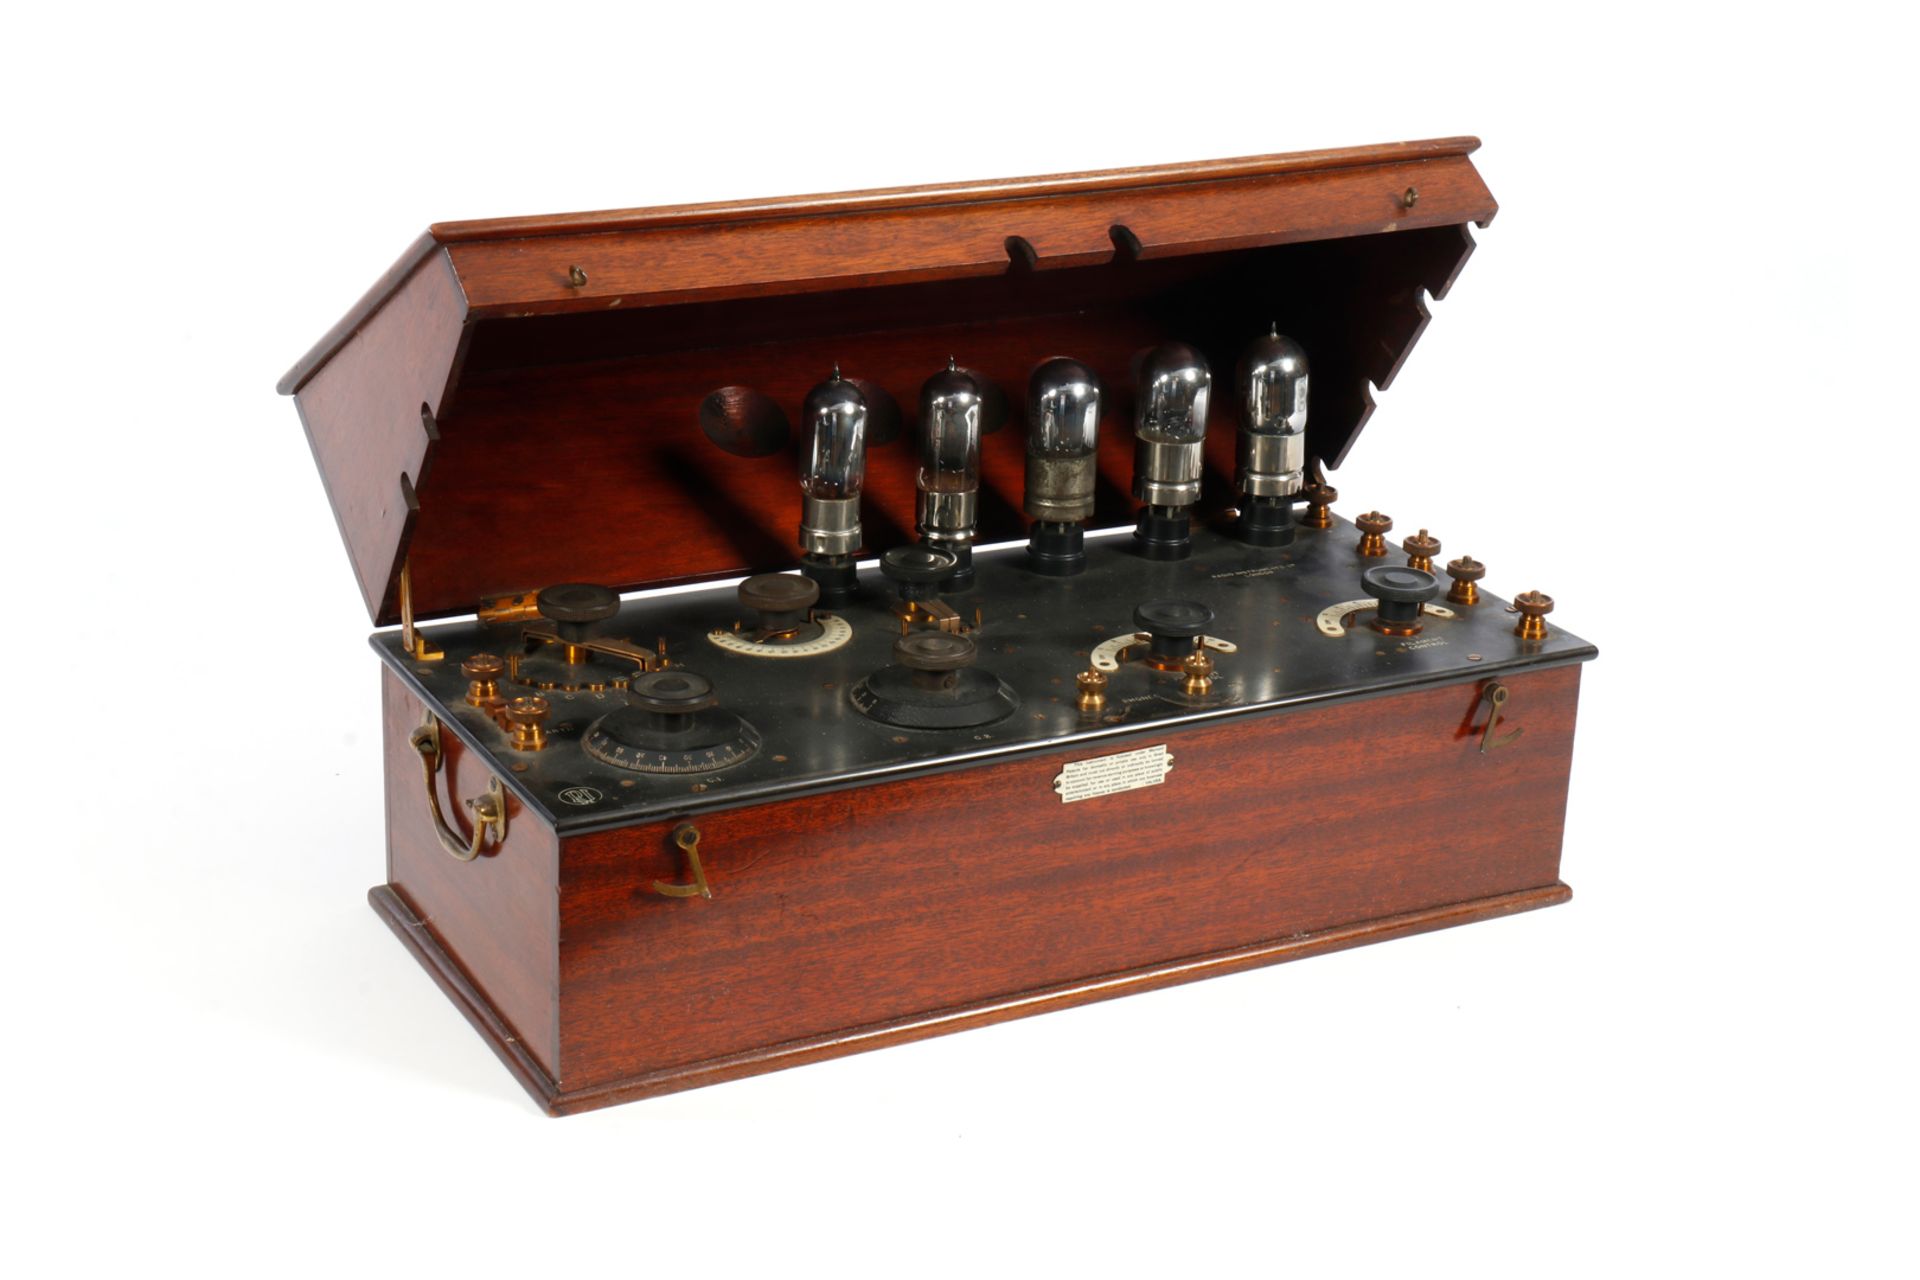 1922 RADIO INSTRUMENT (RI) 5 valves receiving set, varnished Mahogany cabinet with slope lid to